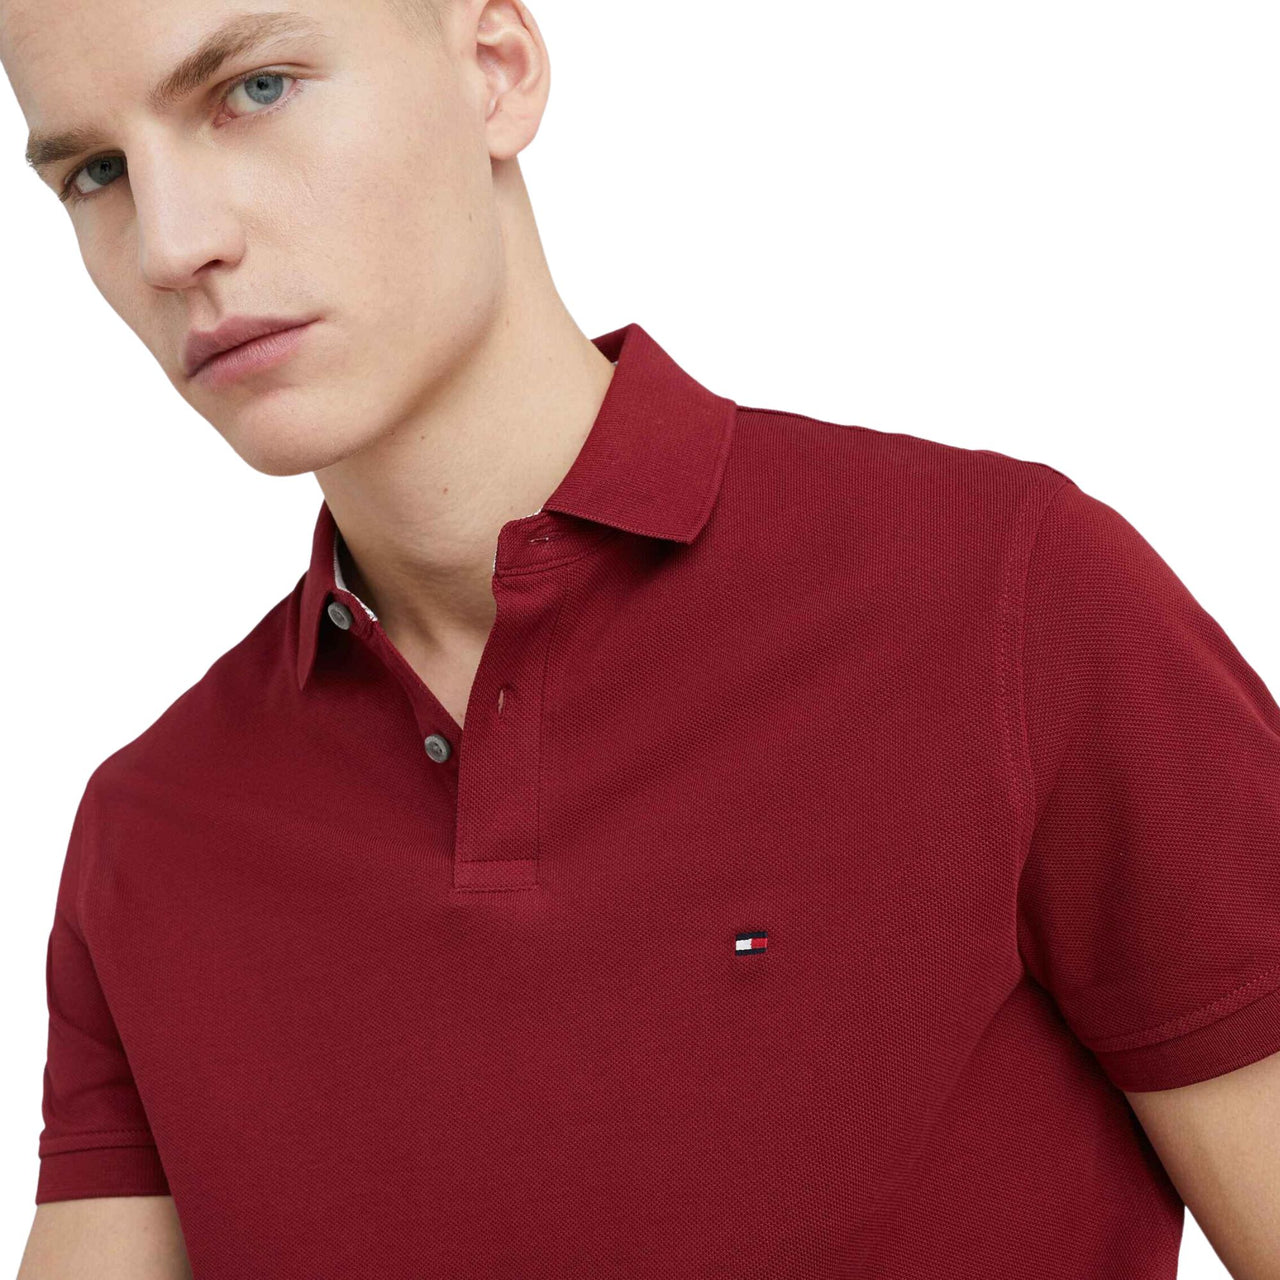 Polos Tommy Hilfiger Hombre 1985 Regular Polo